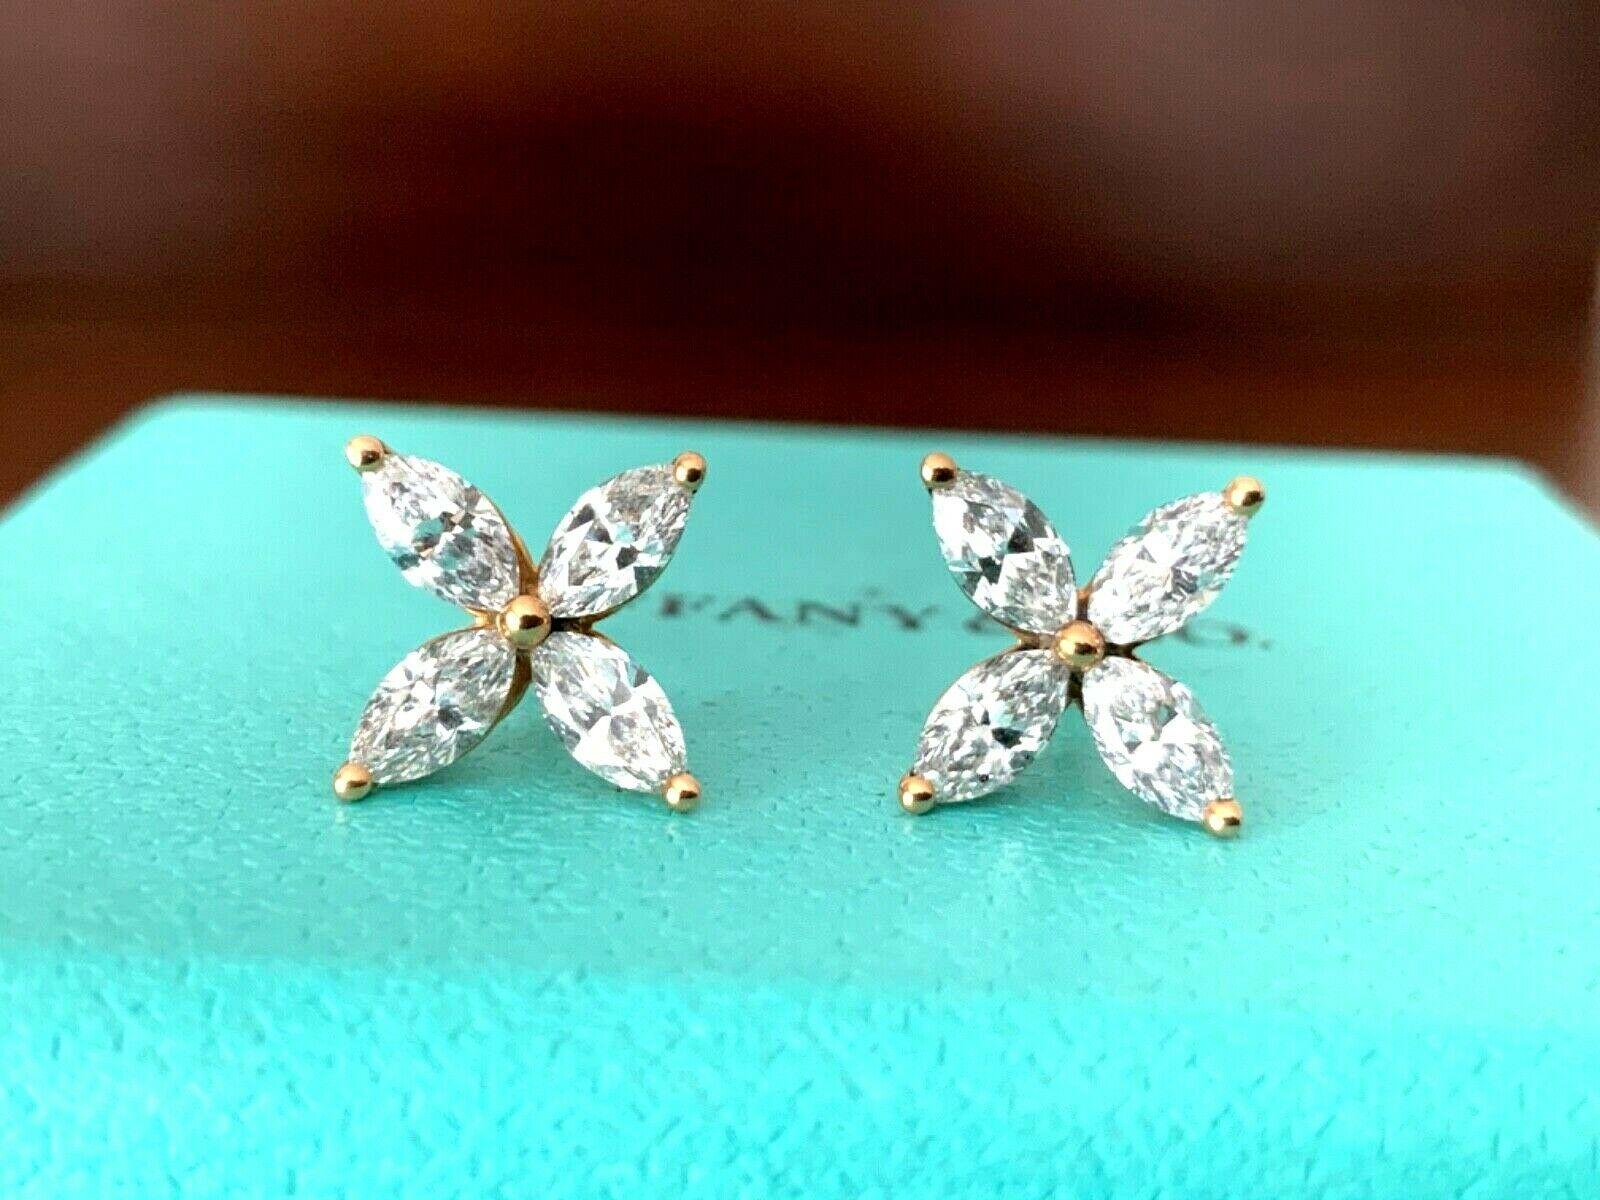 Offered for your consideration is a like new set of 18k Rose Gold Tiffany & Co MEDIUM Sized Victoria earrings.  These are the most popular and stunning set of diamond earrings that Tiffany's sells - especially in ROSE GOLD!

These amazing earrings